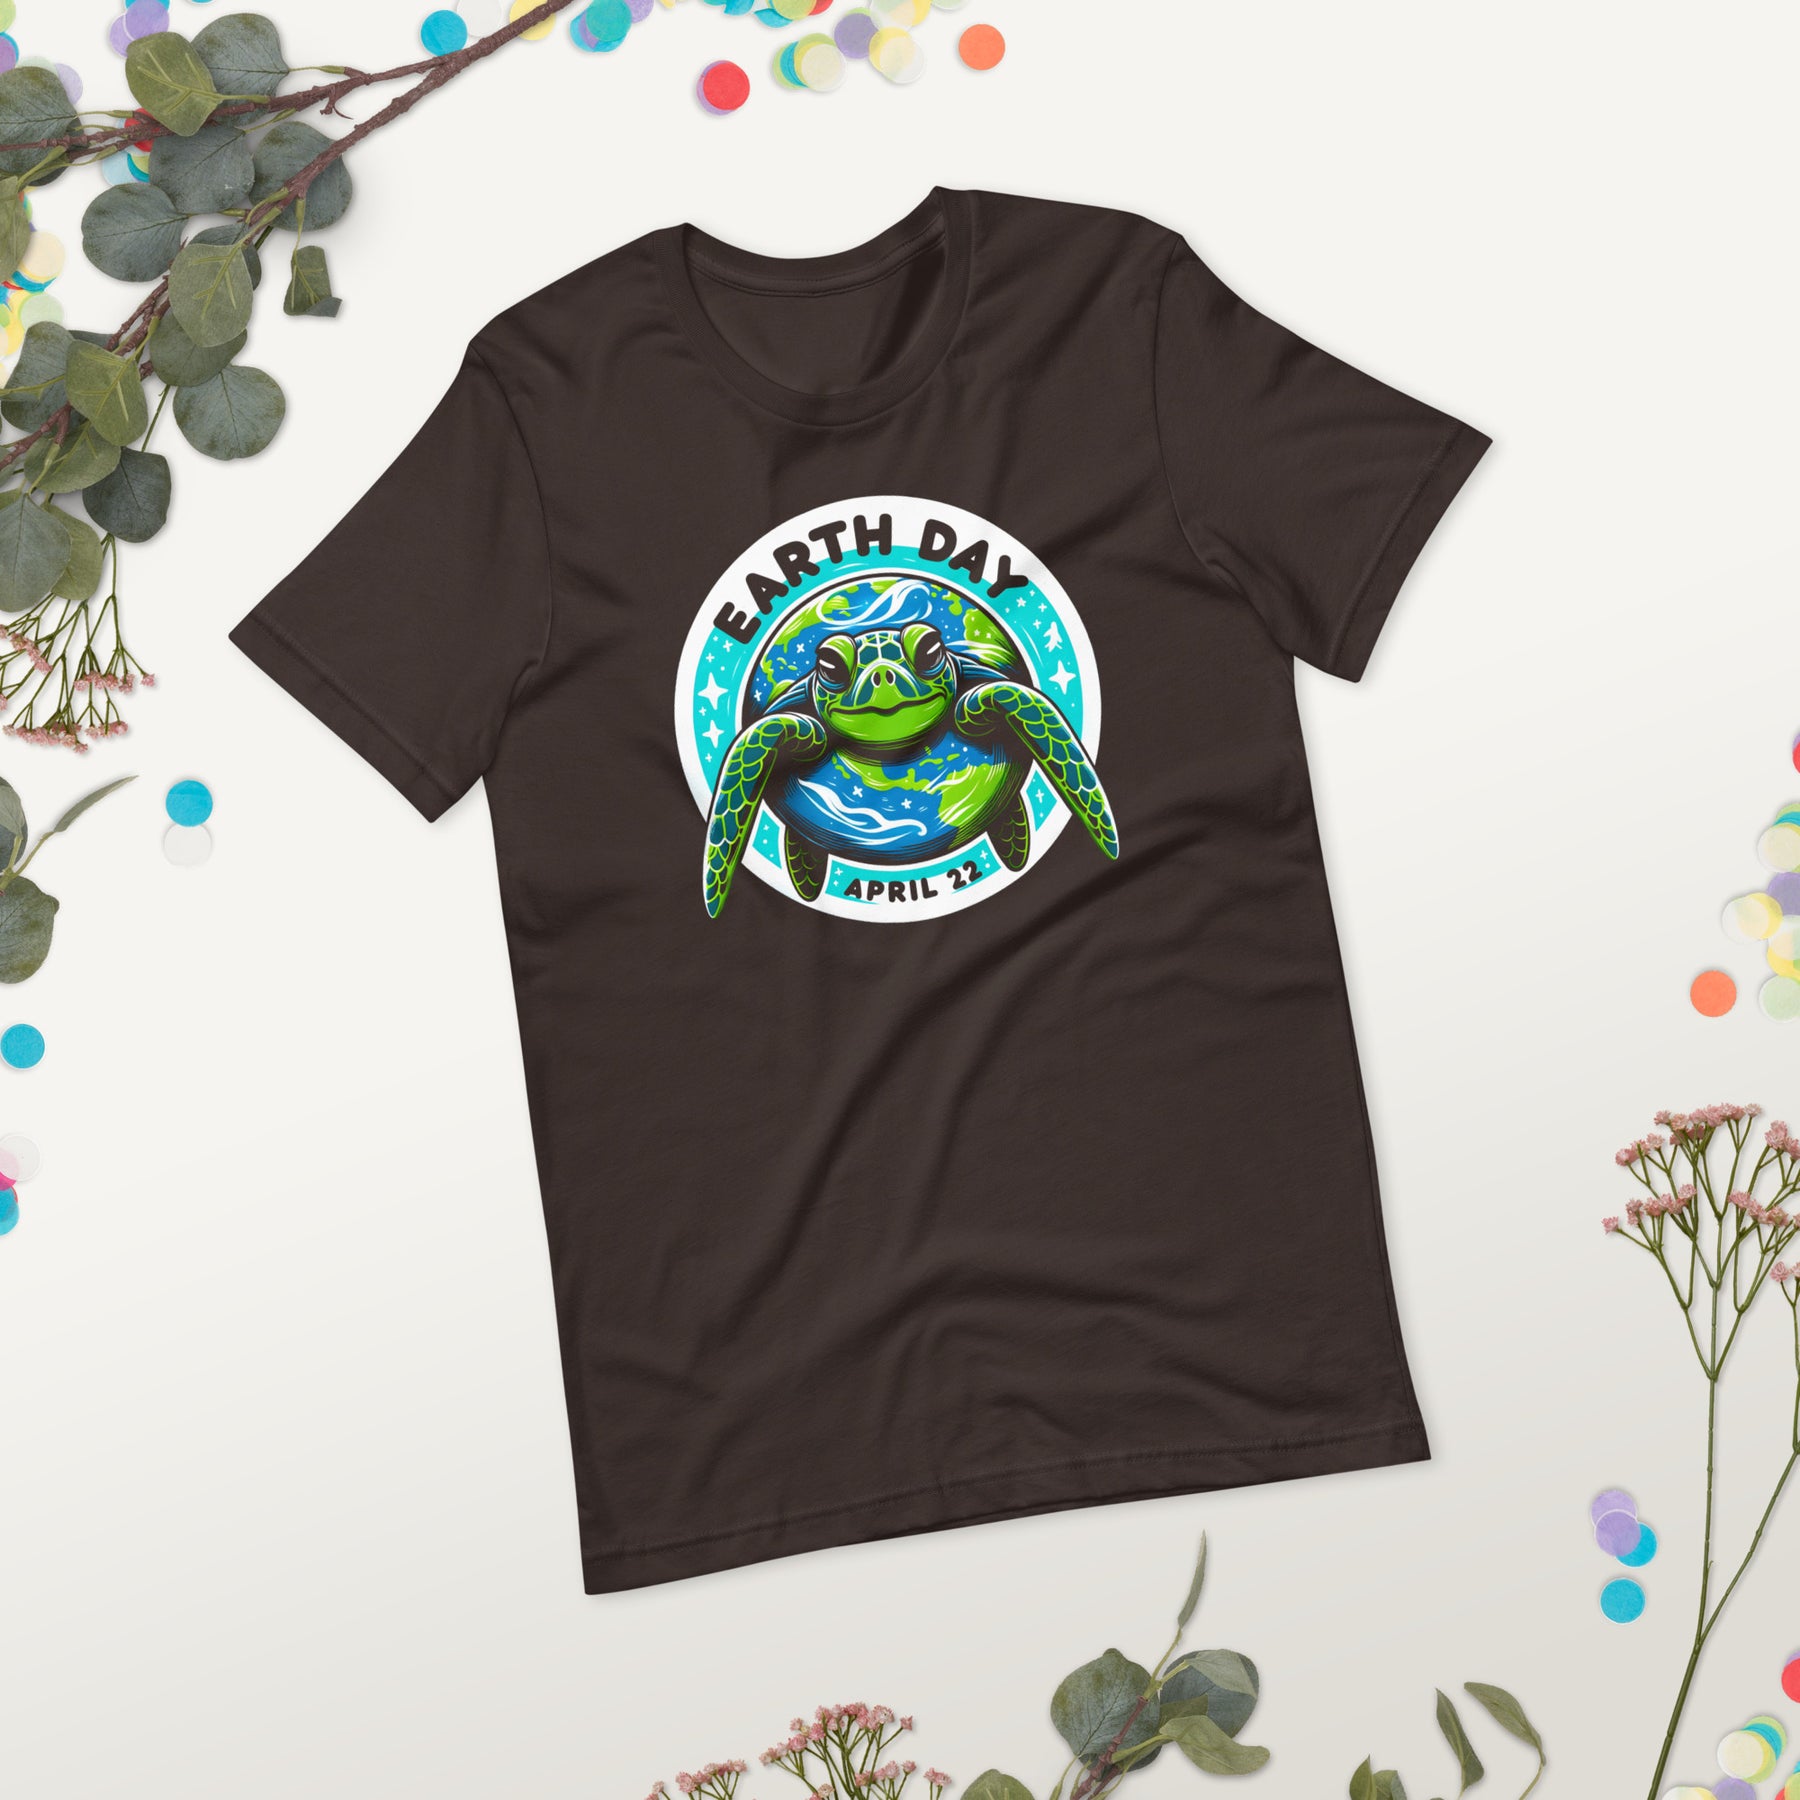 Earth Day Turtle Shirt, Galaxy Sea Turtle Tee for Animal Activists, Environment Conservation Gift, Celebrate April 22